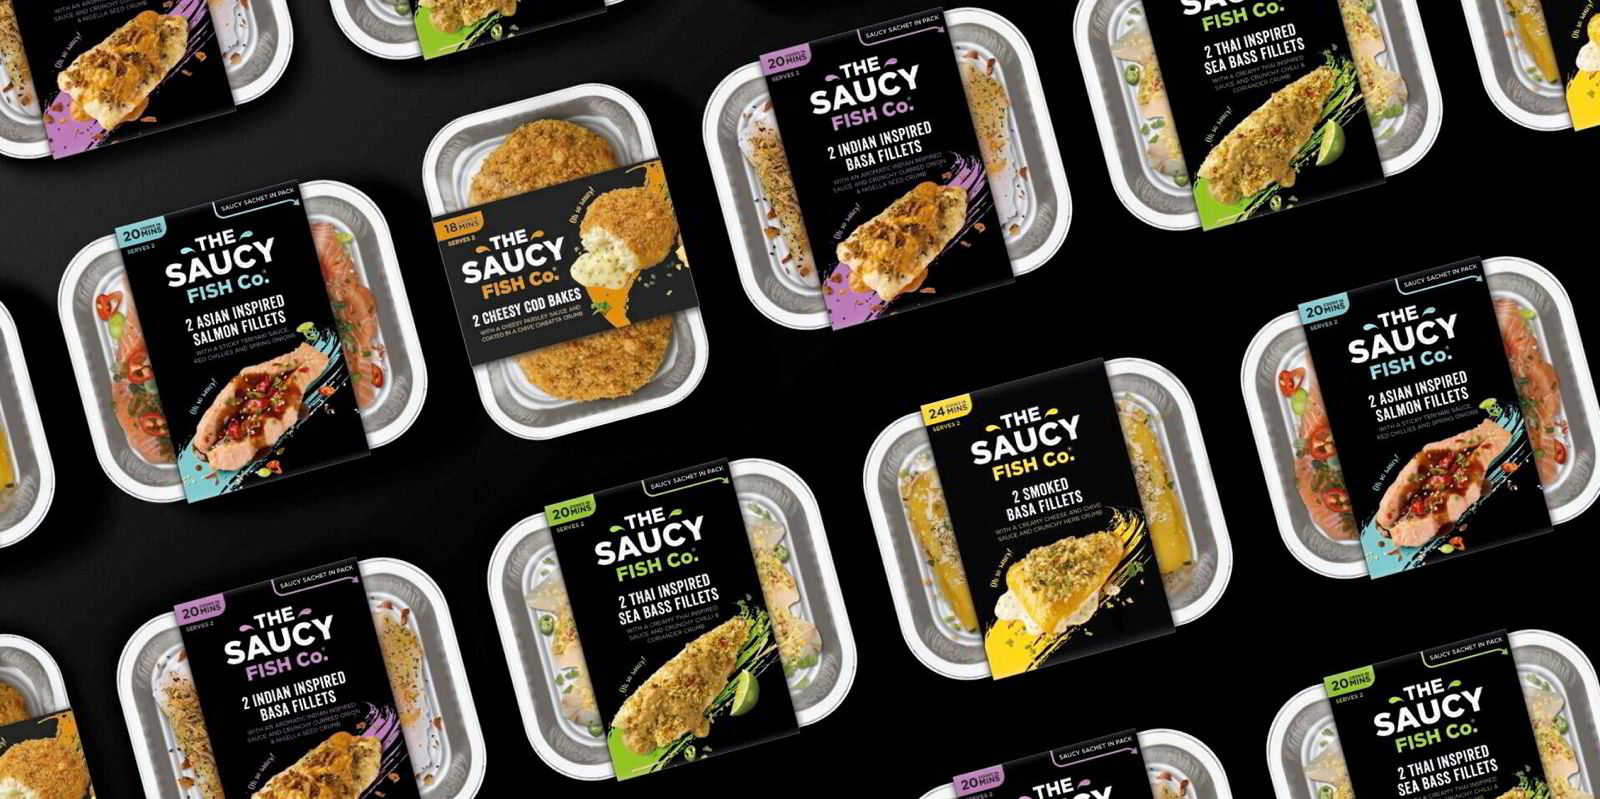 It's back: Hilton Seafood UK relaunches The Saucy Fish Co. brand